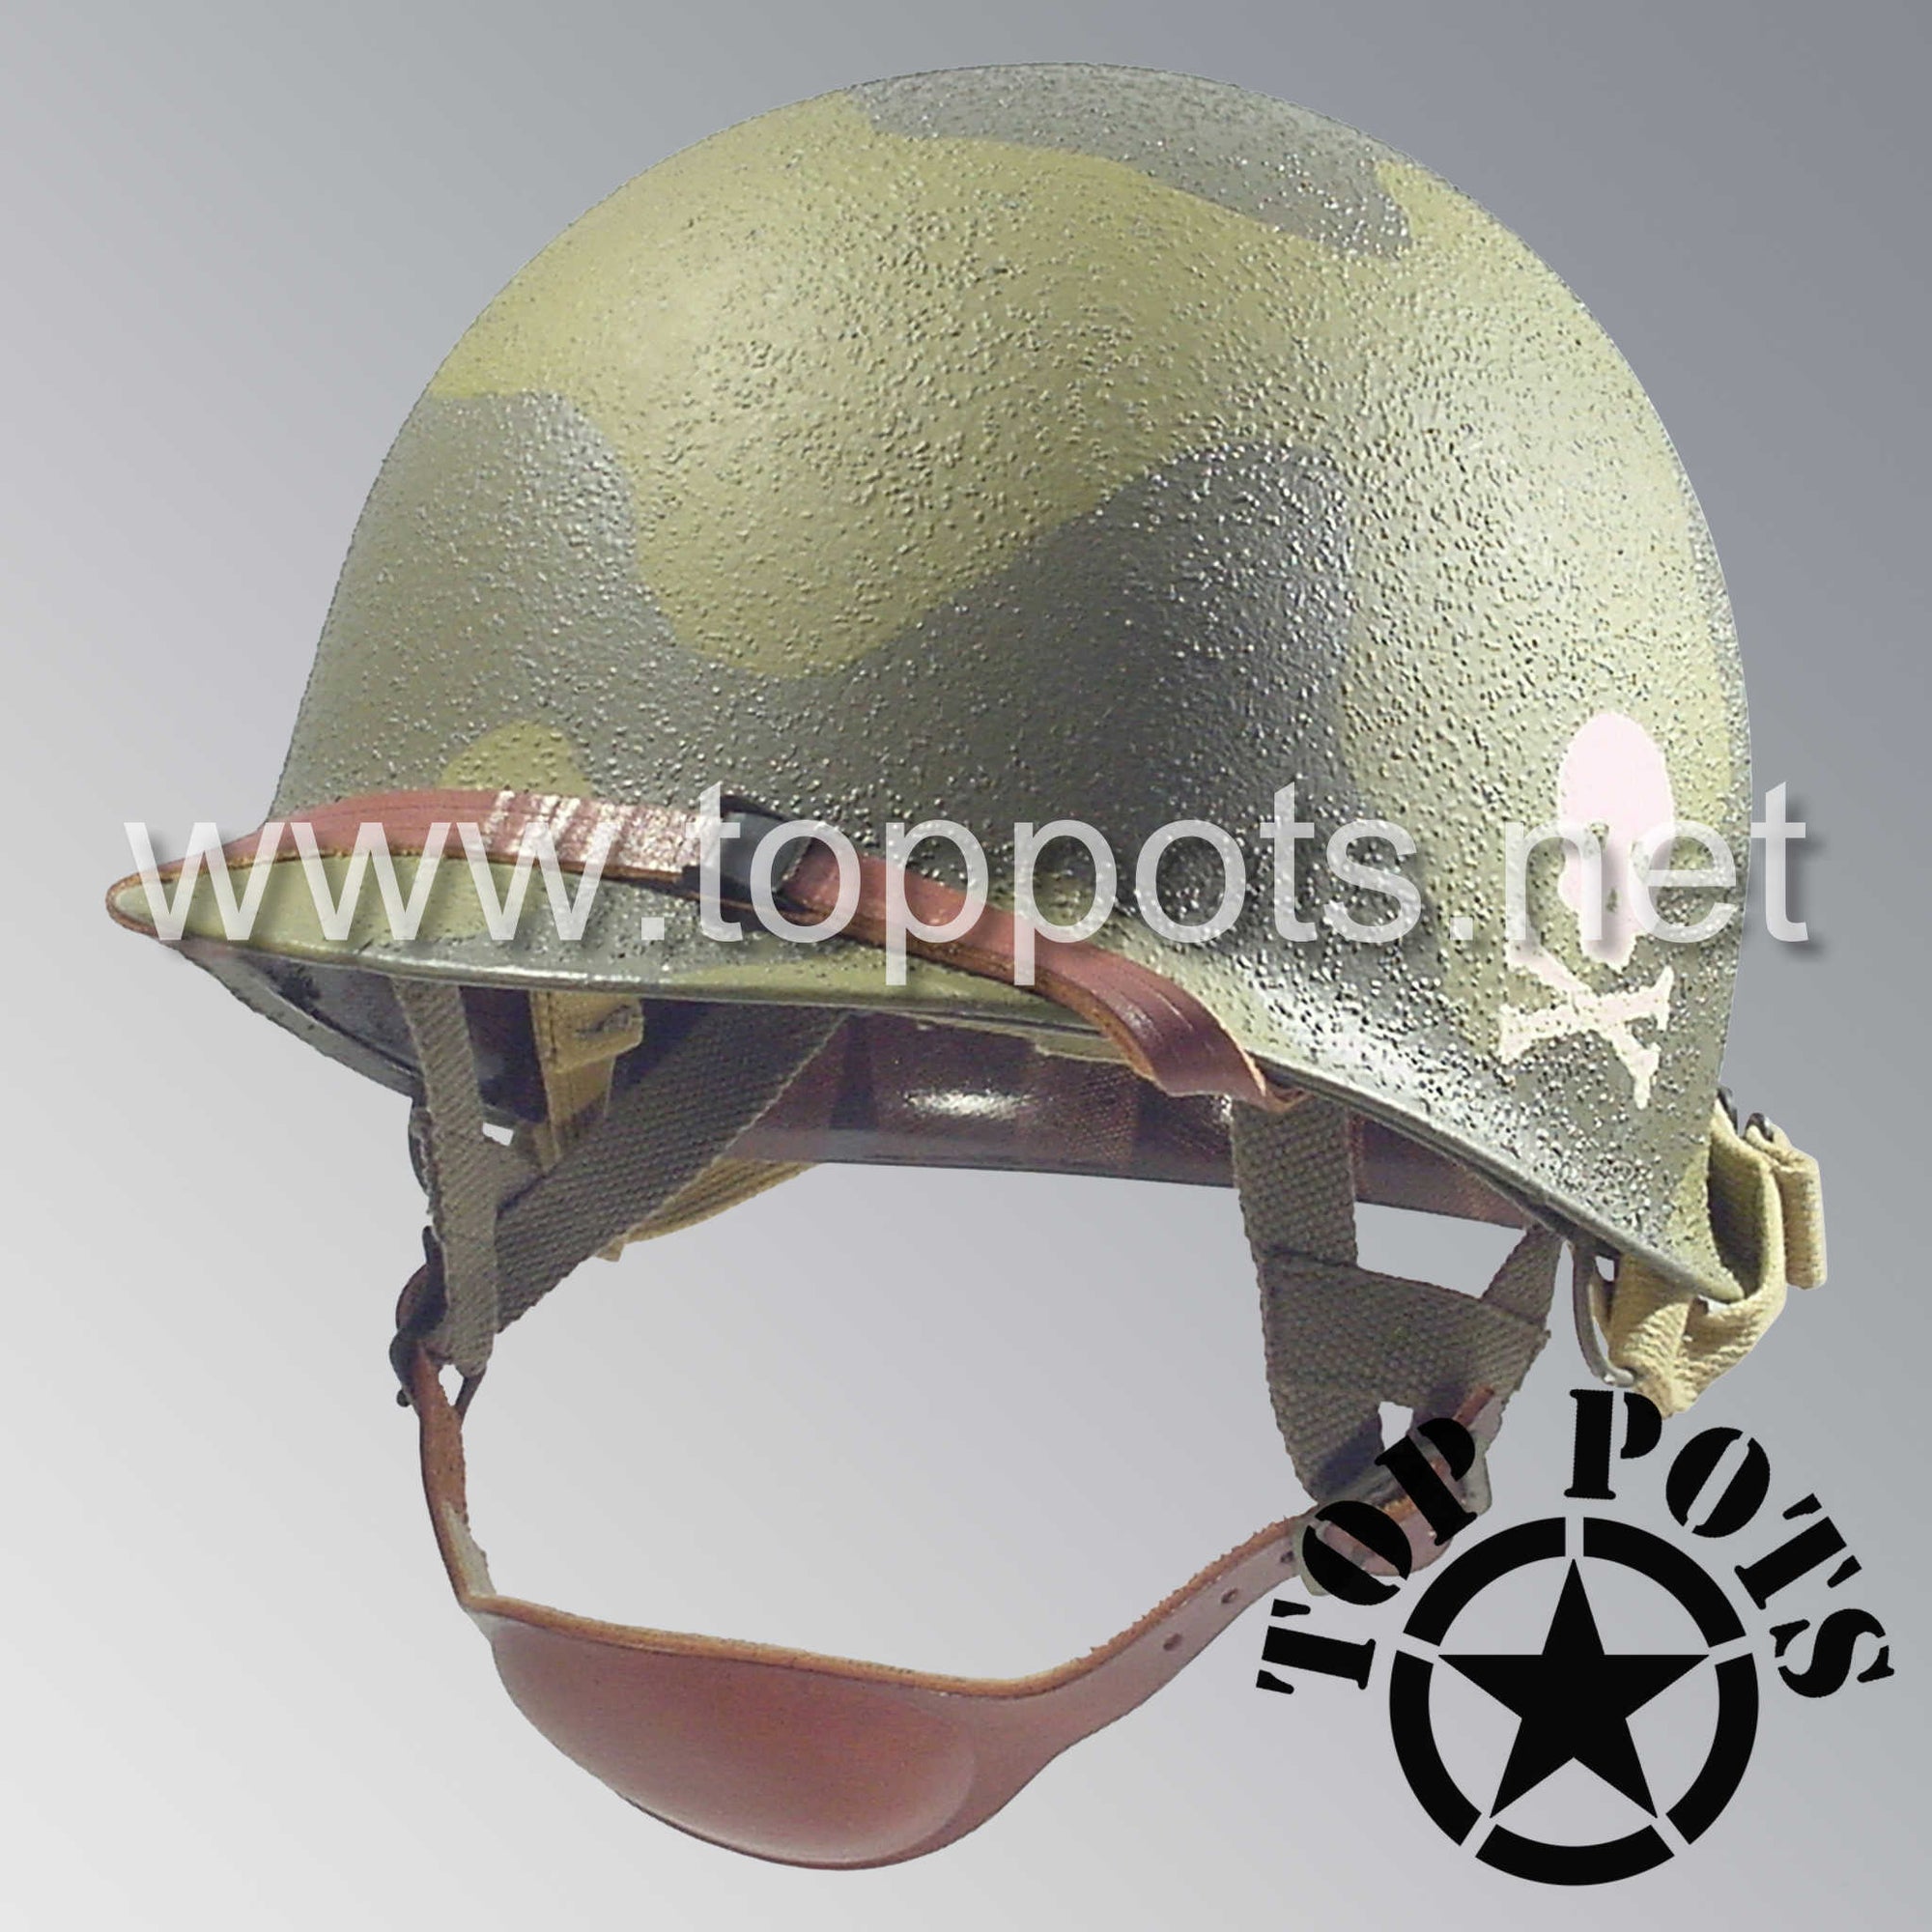 WWII US Army Restored Original M2 Paratrooper Airborne Helmet D Bale Shell and Liner with 504th PIR Officer Pathfinder Camouflage Emblem